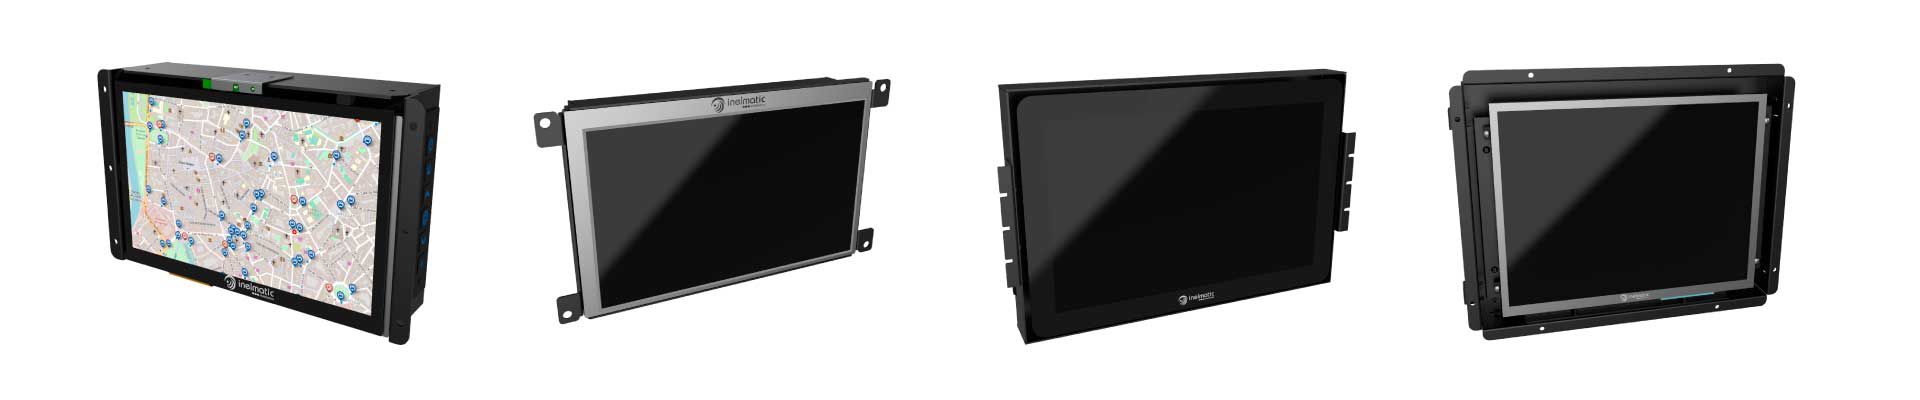 Monitores open frame - Inelmatic